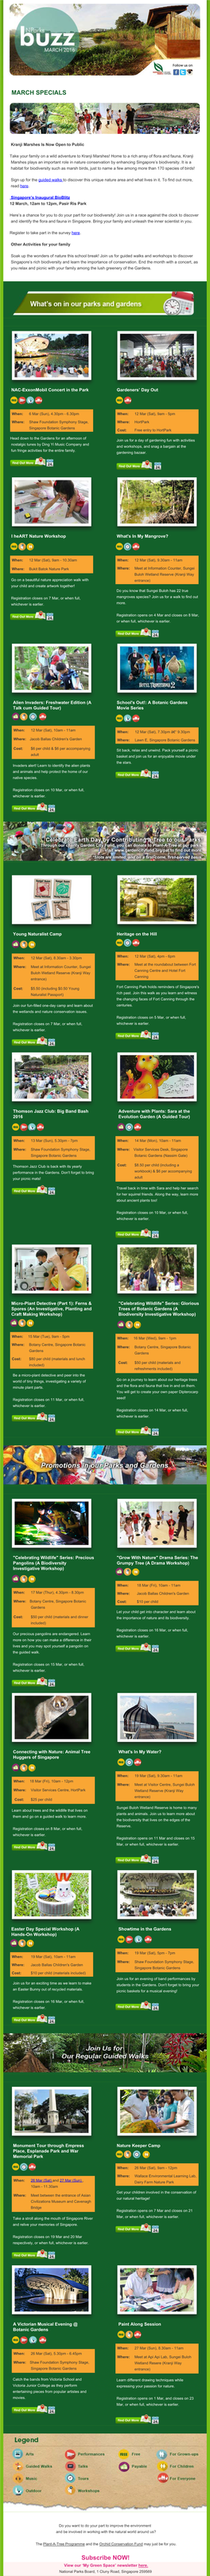 Nparks Buzz March 2016